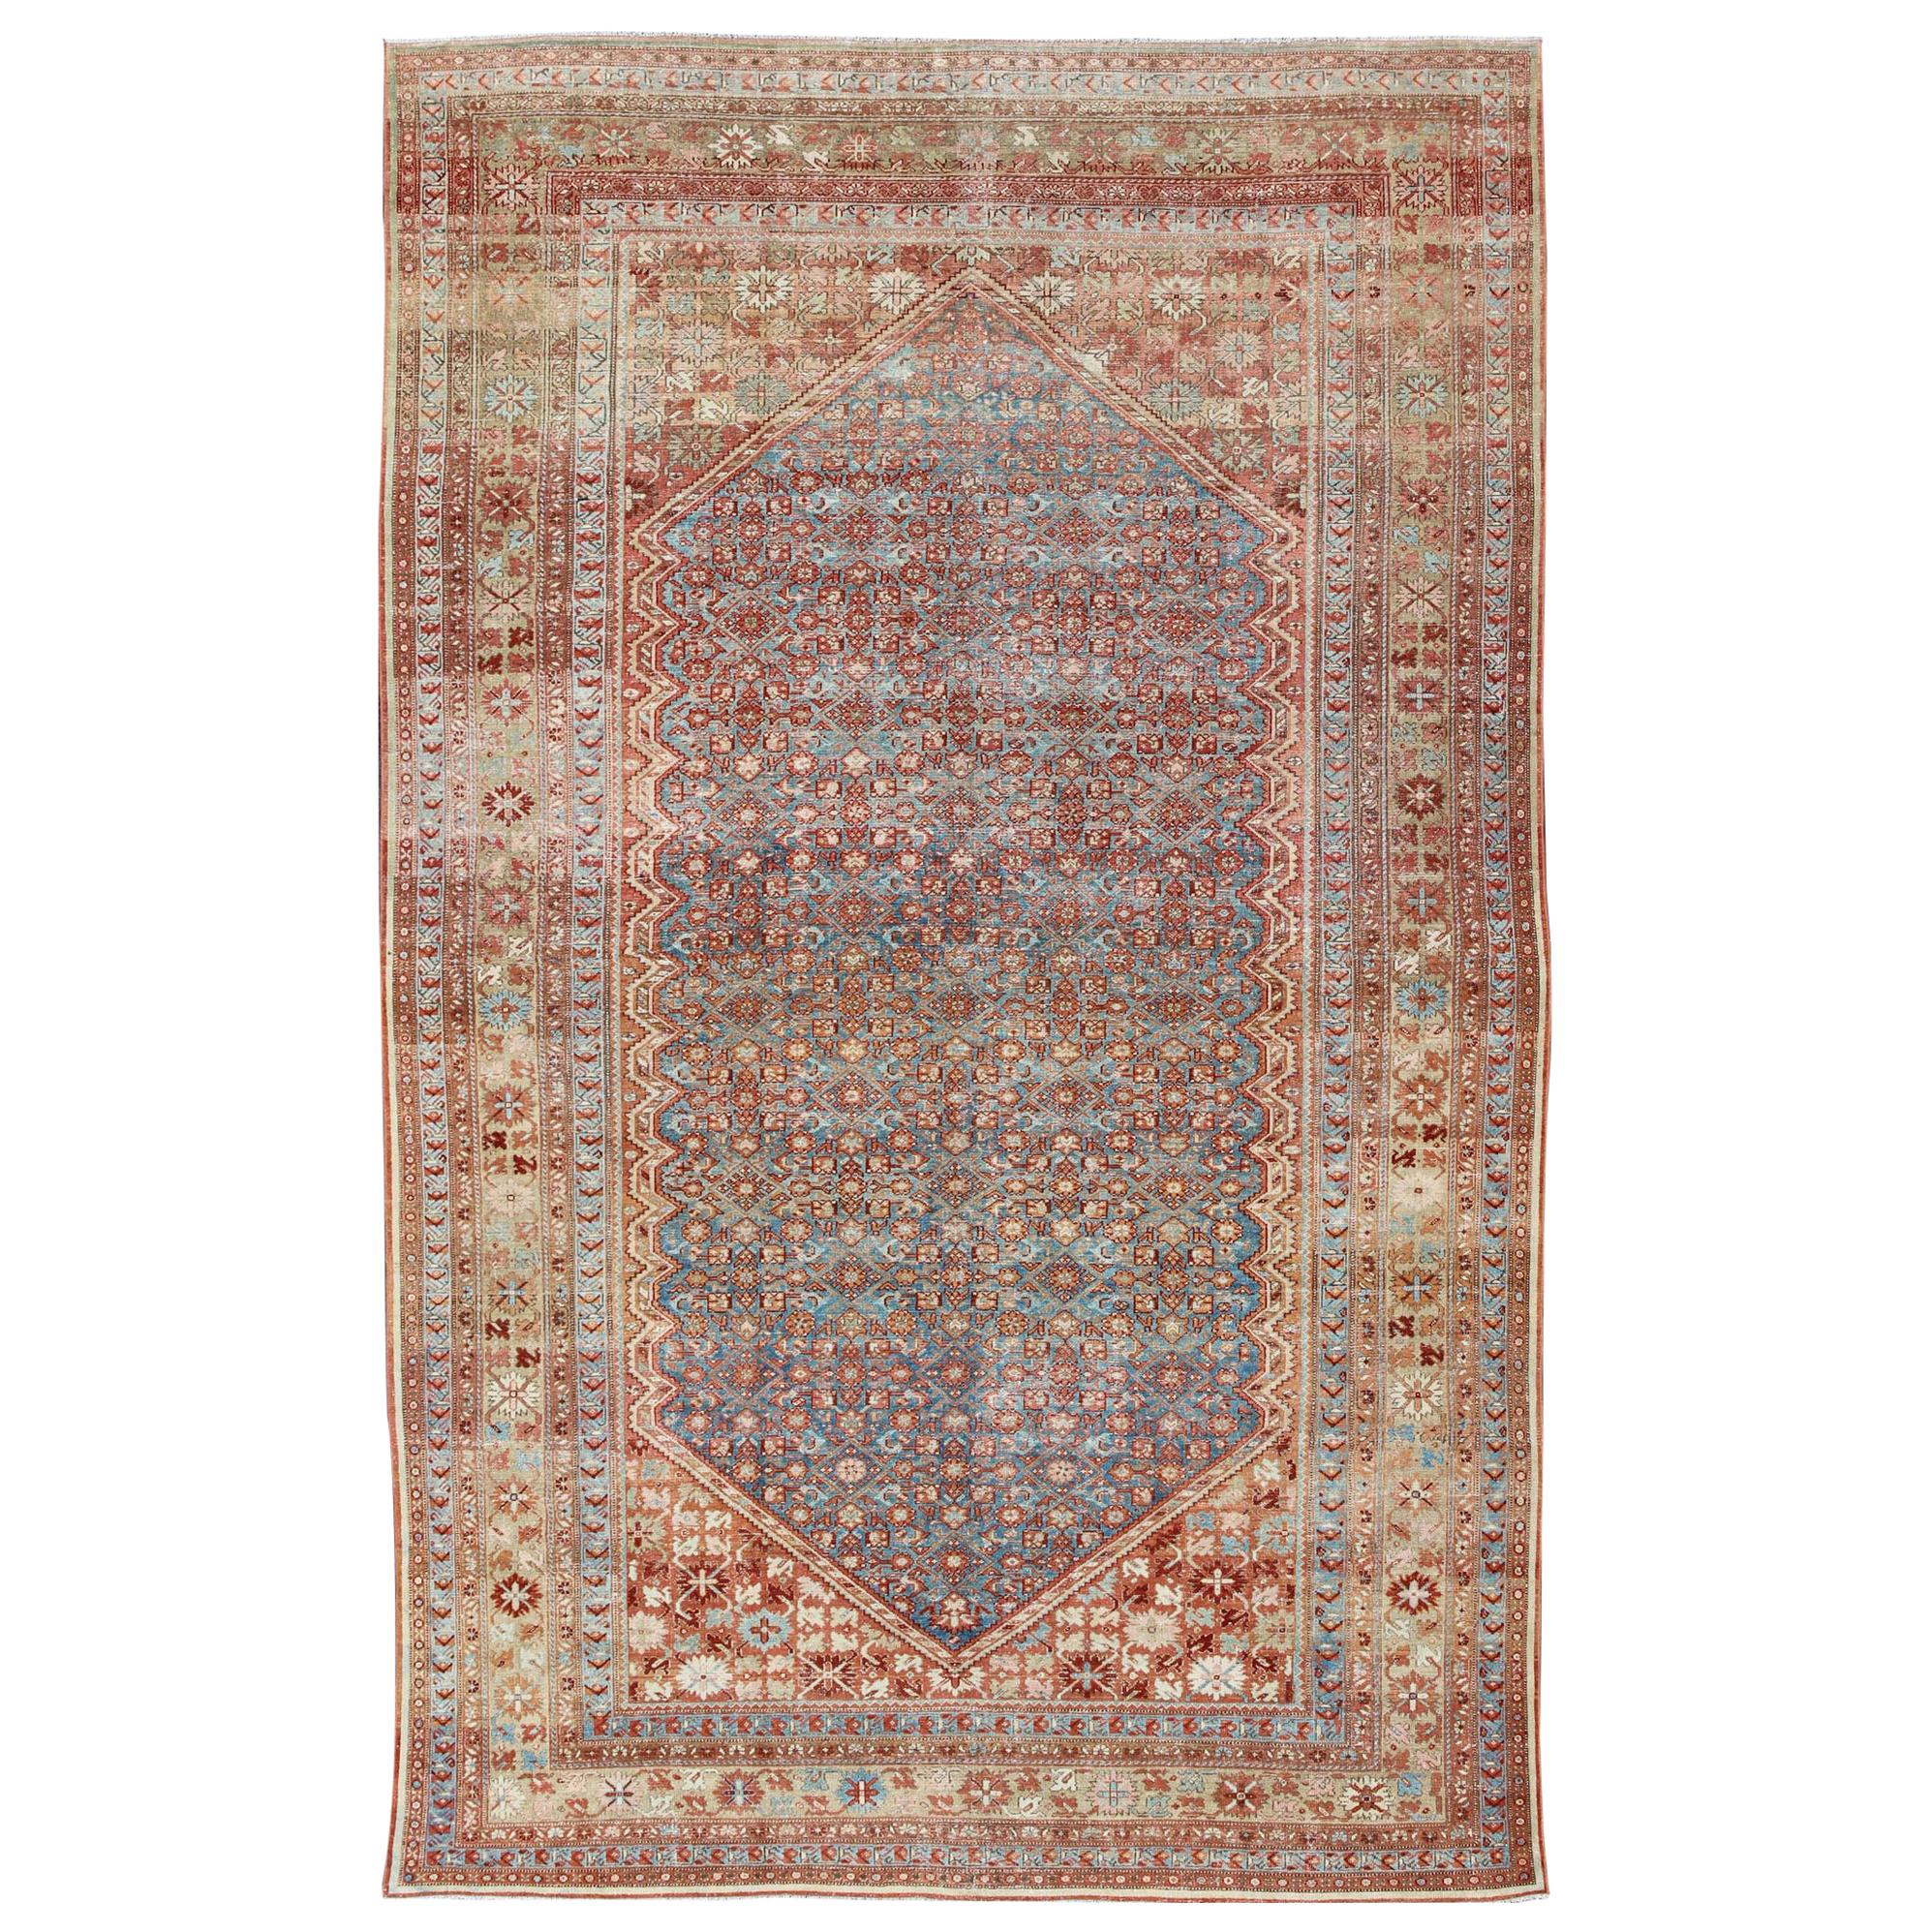 Blue Colored Large Antique Persian Malayer Rug with All-Over Design